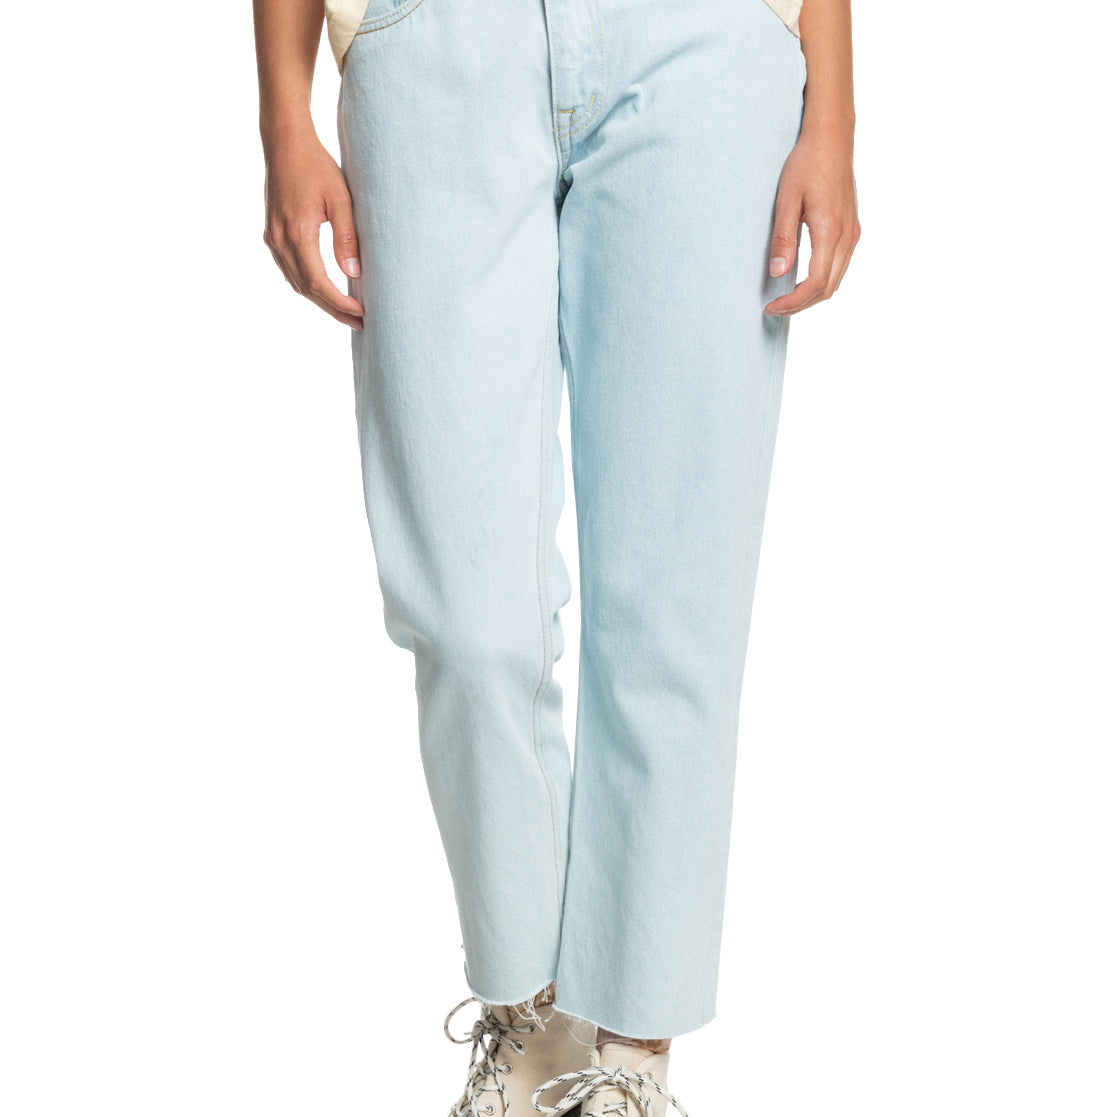 Quiksilver Women's The Up Size Pants BFMW 25